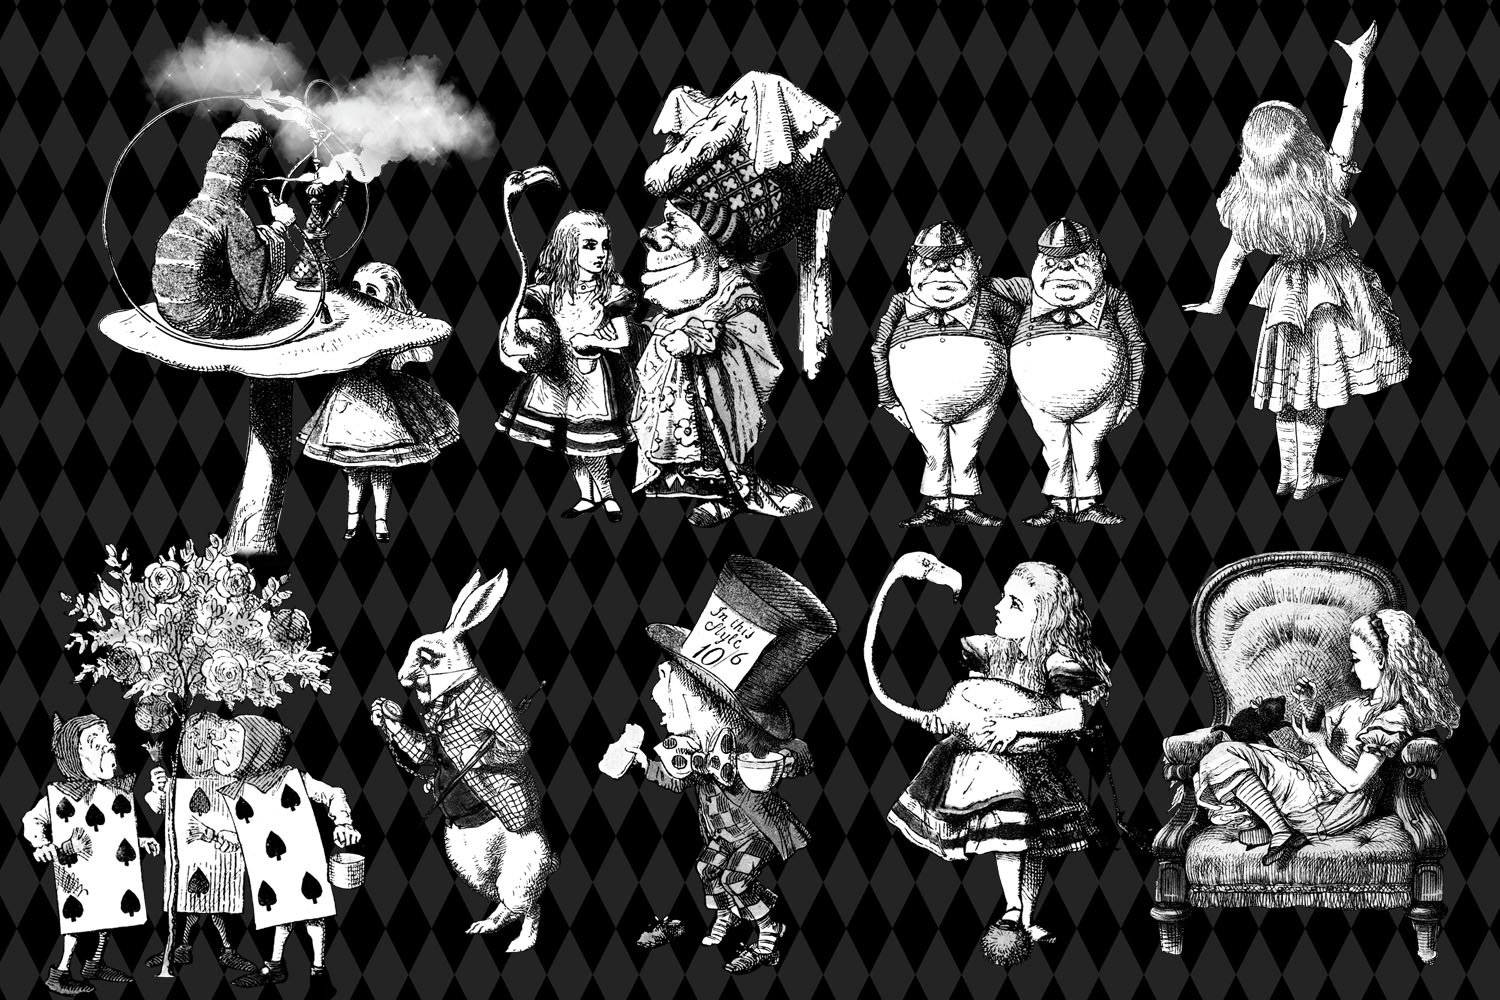 Various characters and more.